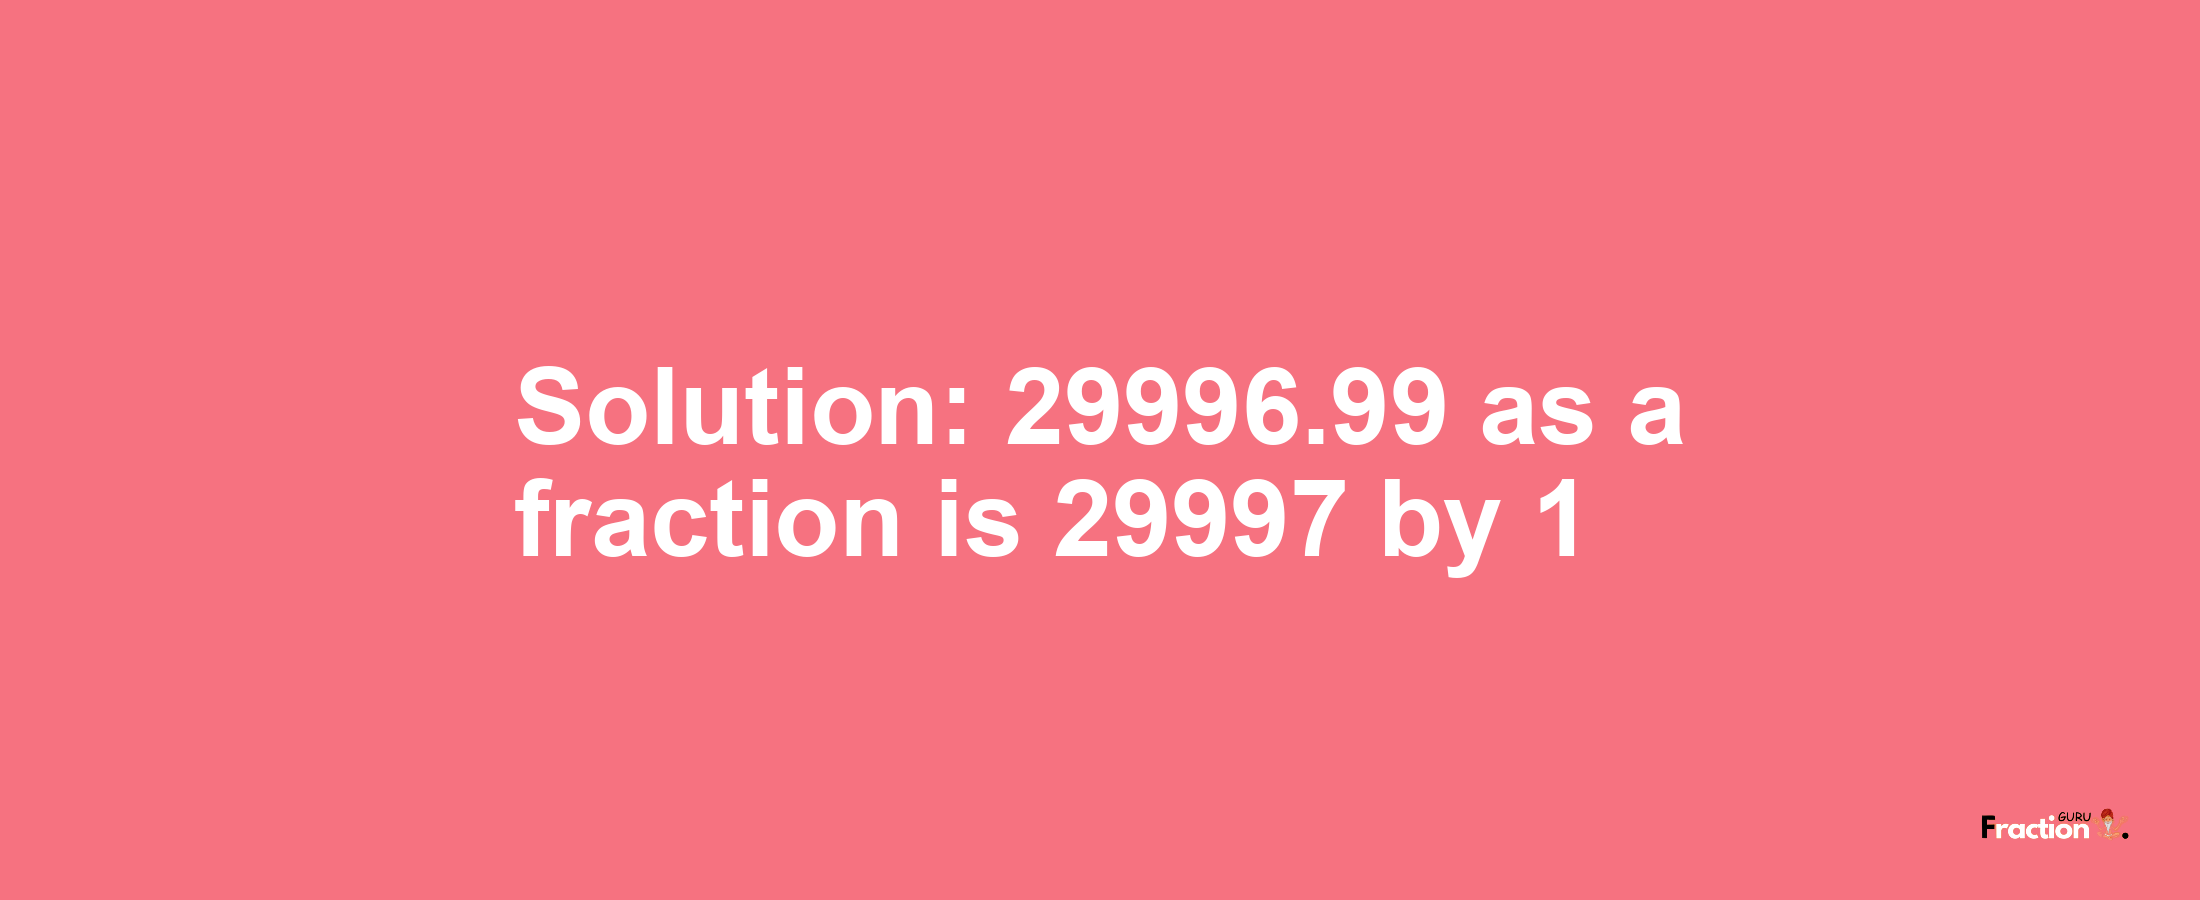 Solution:29996.99 as a fraction is 29997/1